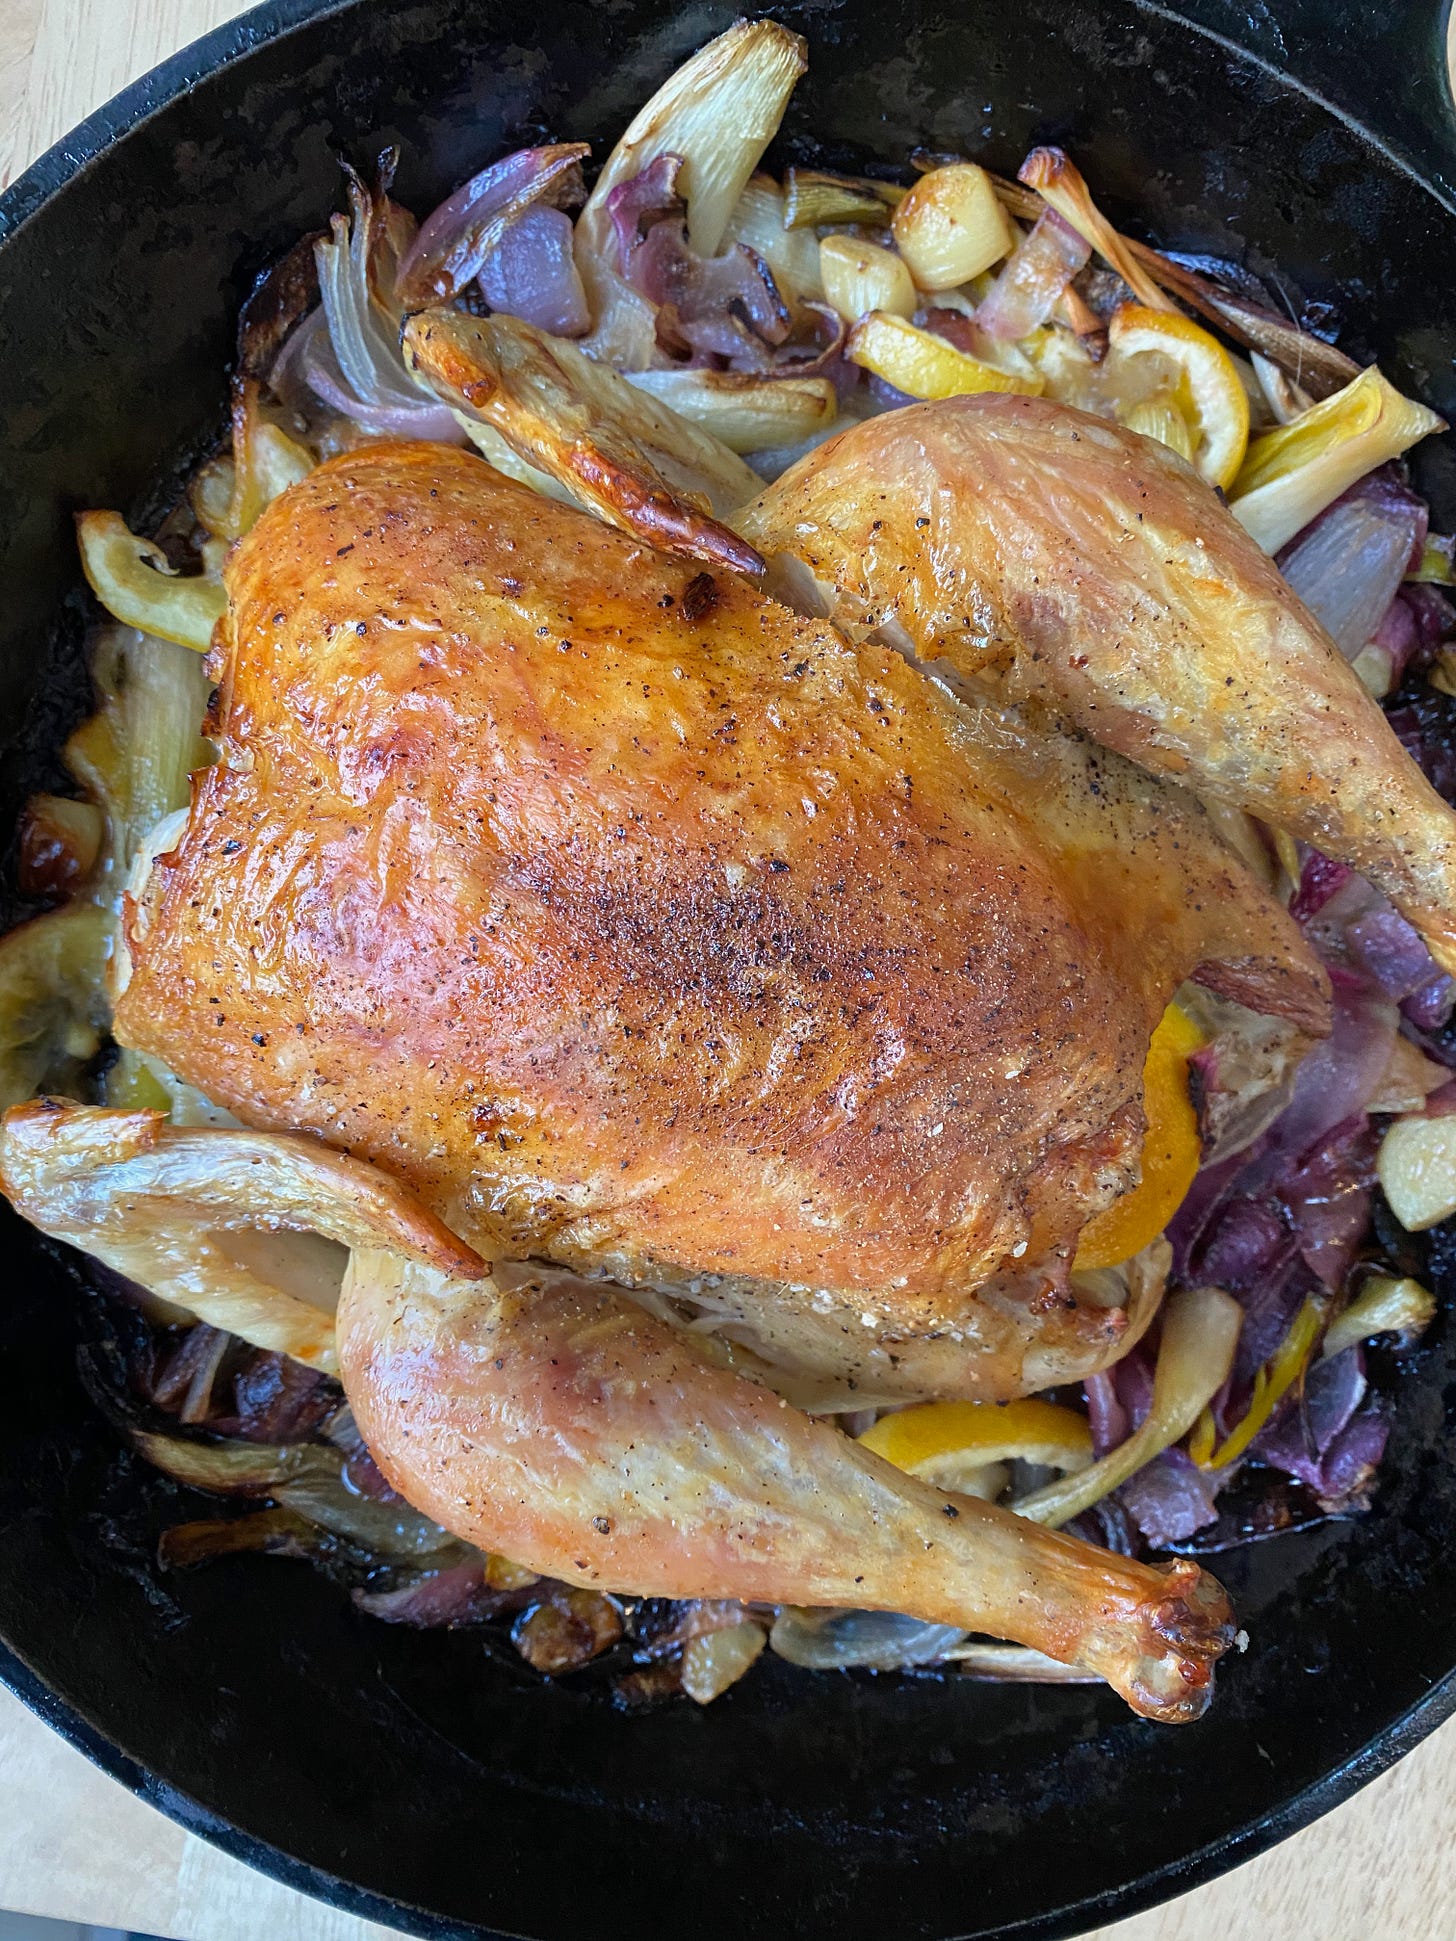  A golden brown roast chicken sits in a cast iron pan. Slivers of red and yellow onions, lemon halves, and garlic cloves are nestled around it.